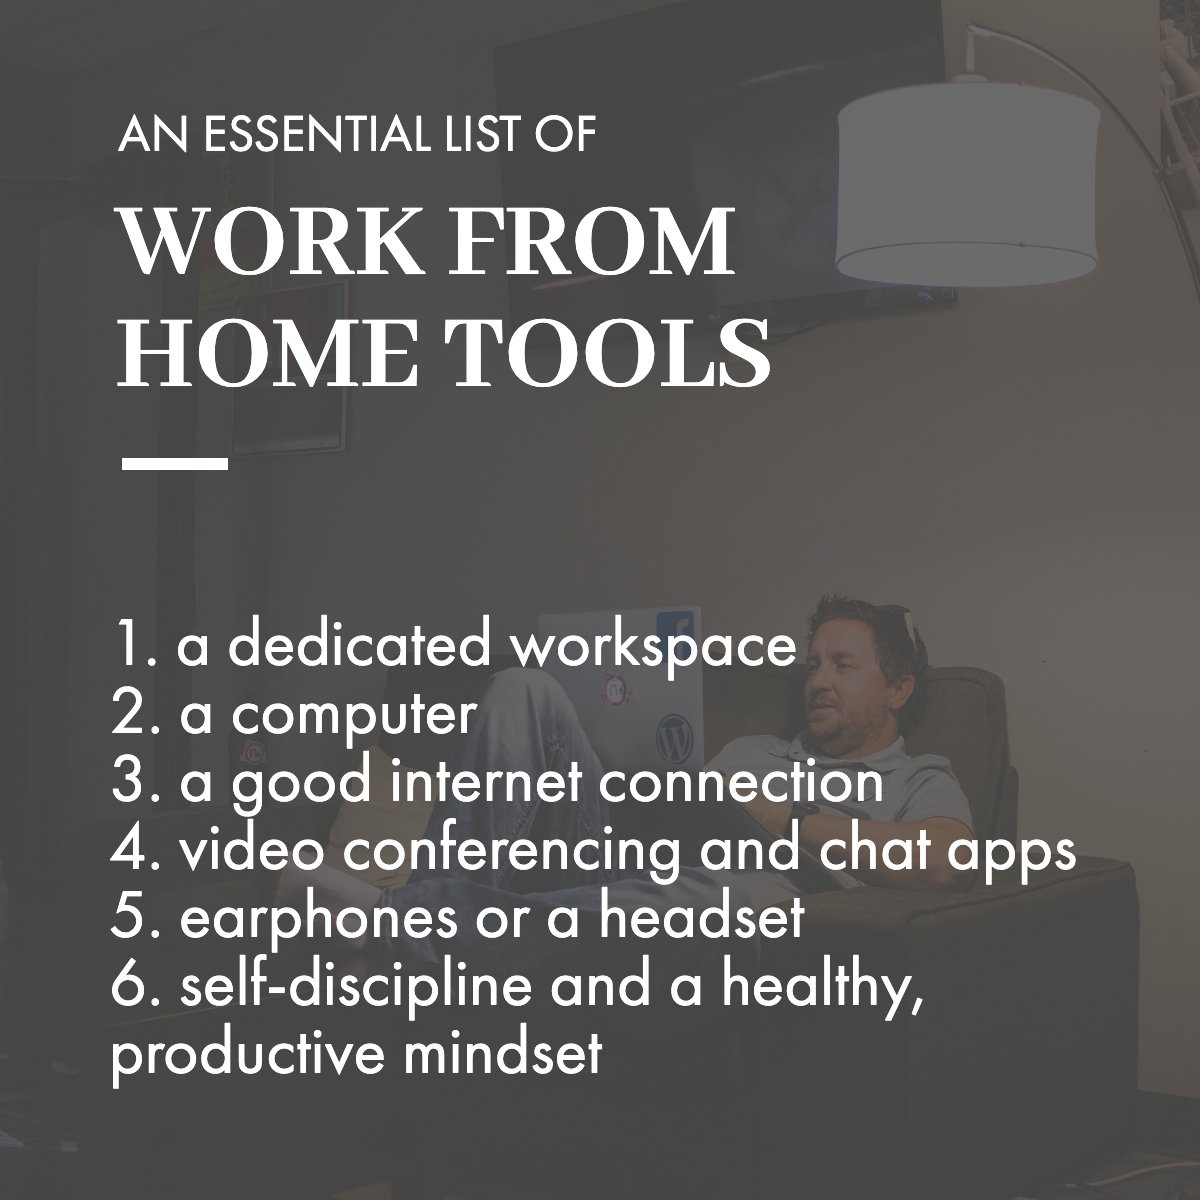 Check the list for essentials to work from home 💻

#workfromhome     #workathome     #homelifestyle     #homestudio     #remotelife
#wearemvp #mvprealty #iloverealestate #realtor #realestate